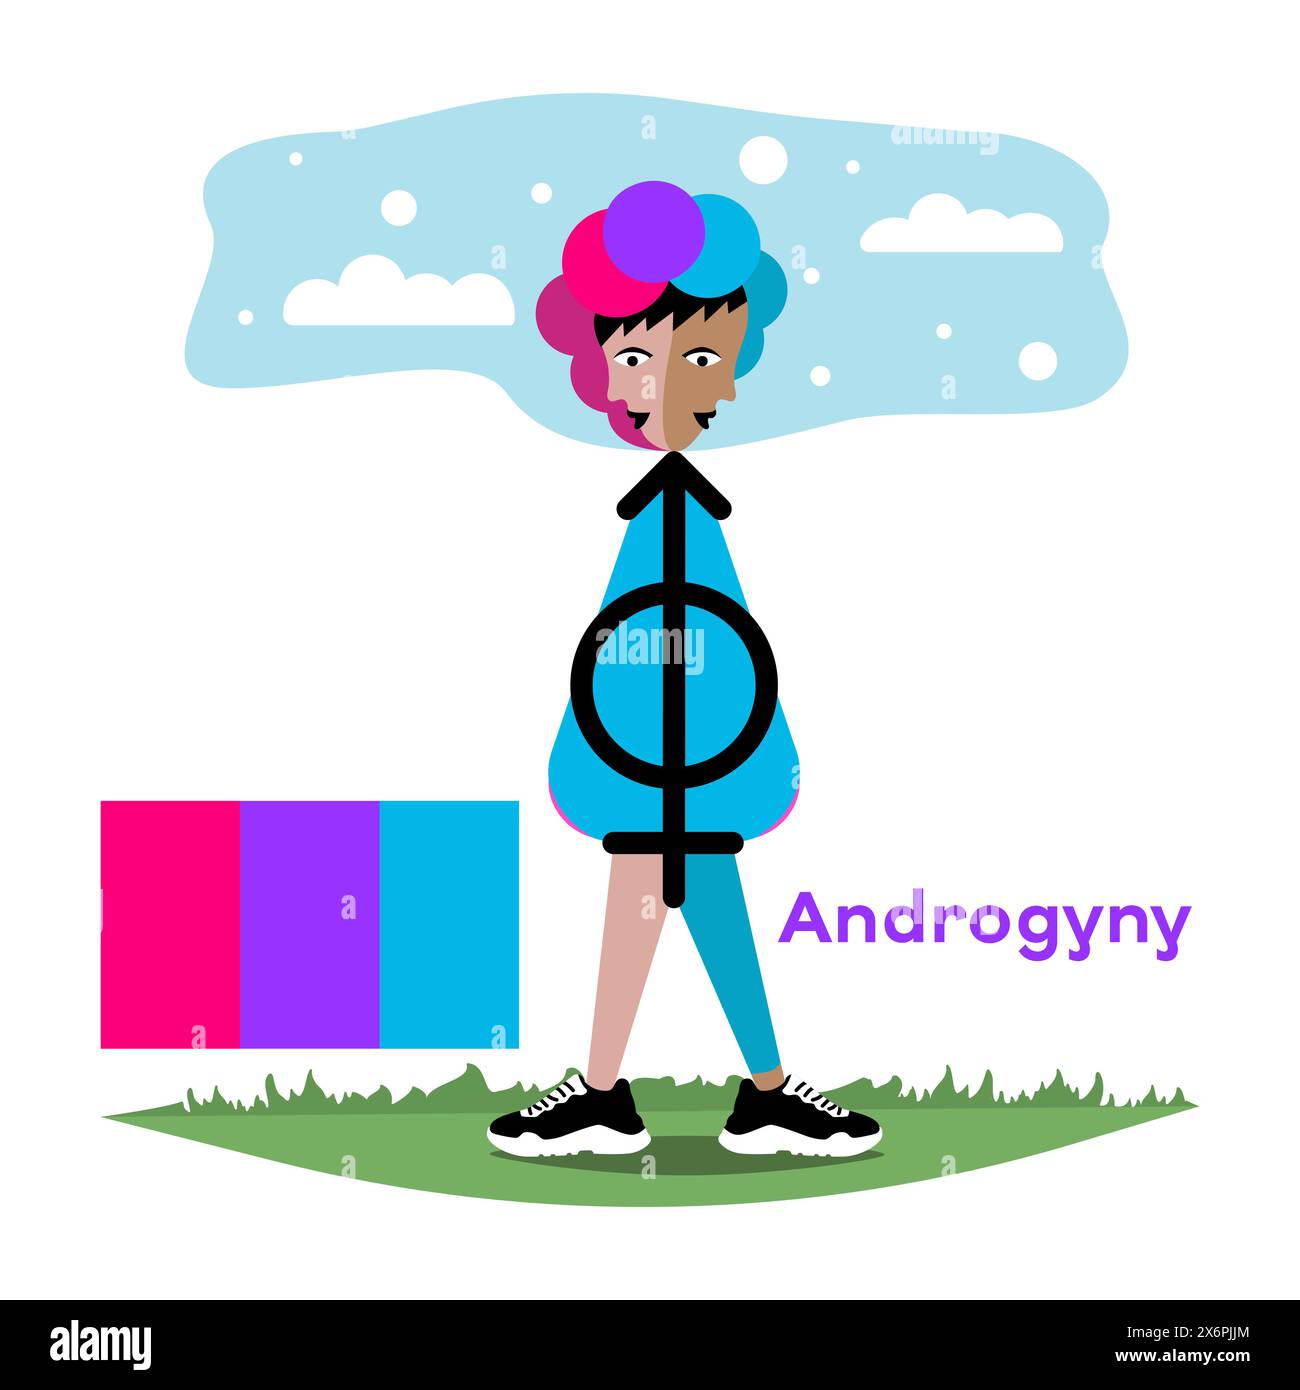 Androgyny symbol. People androgyne, symbol and flag of androgynes. Stock Vector